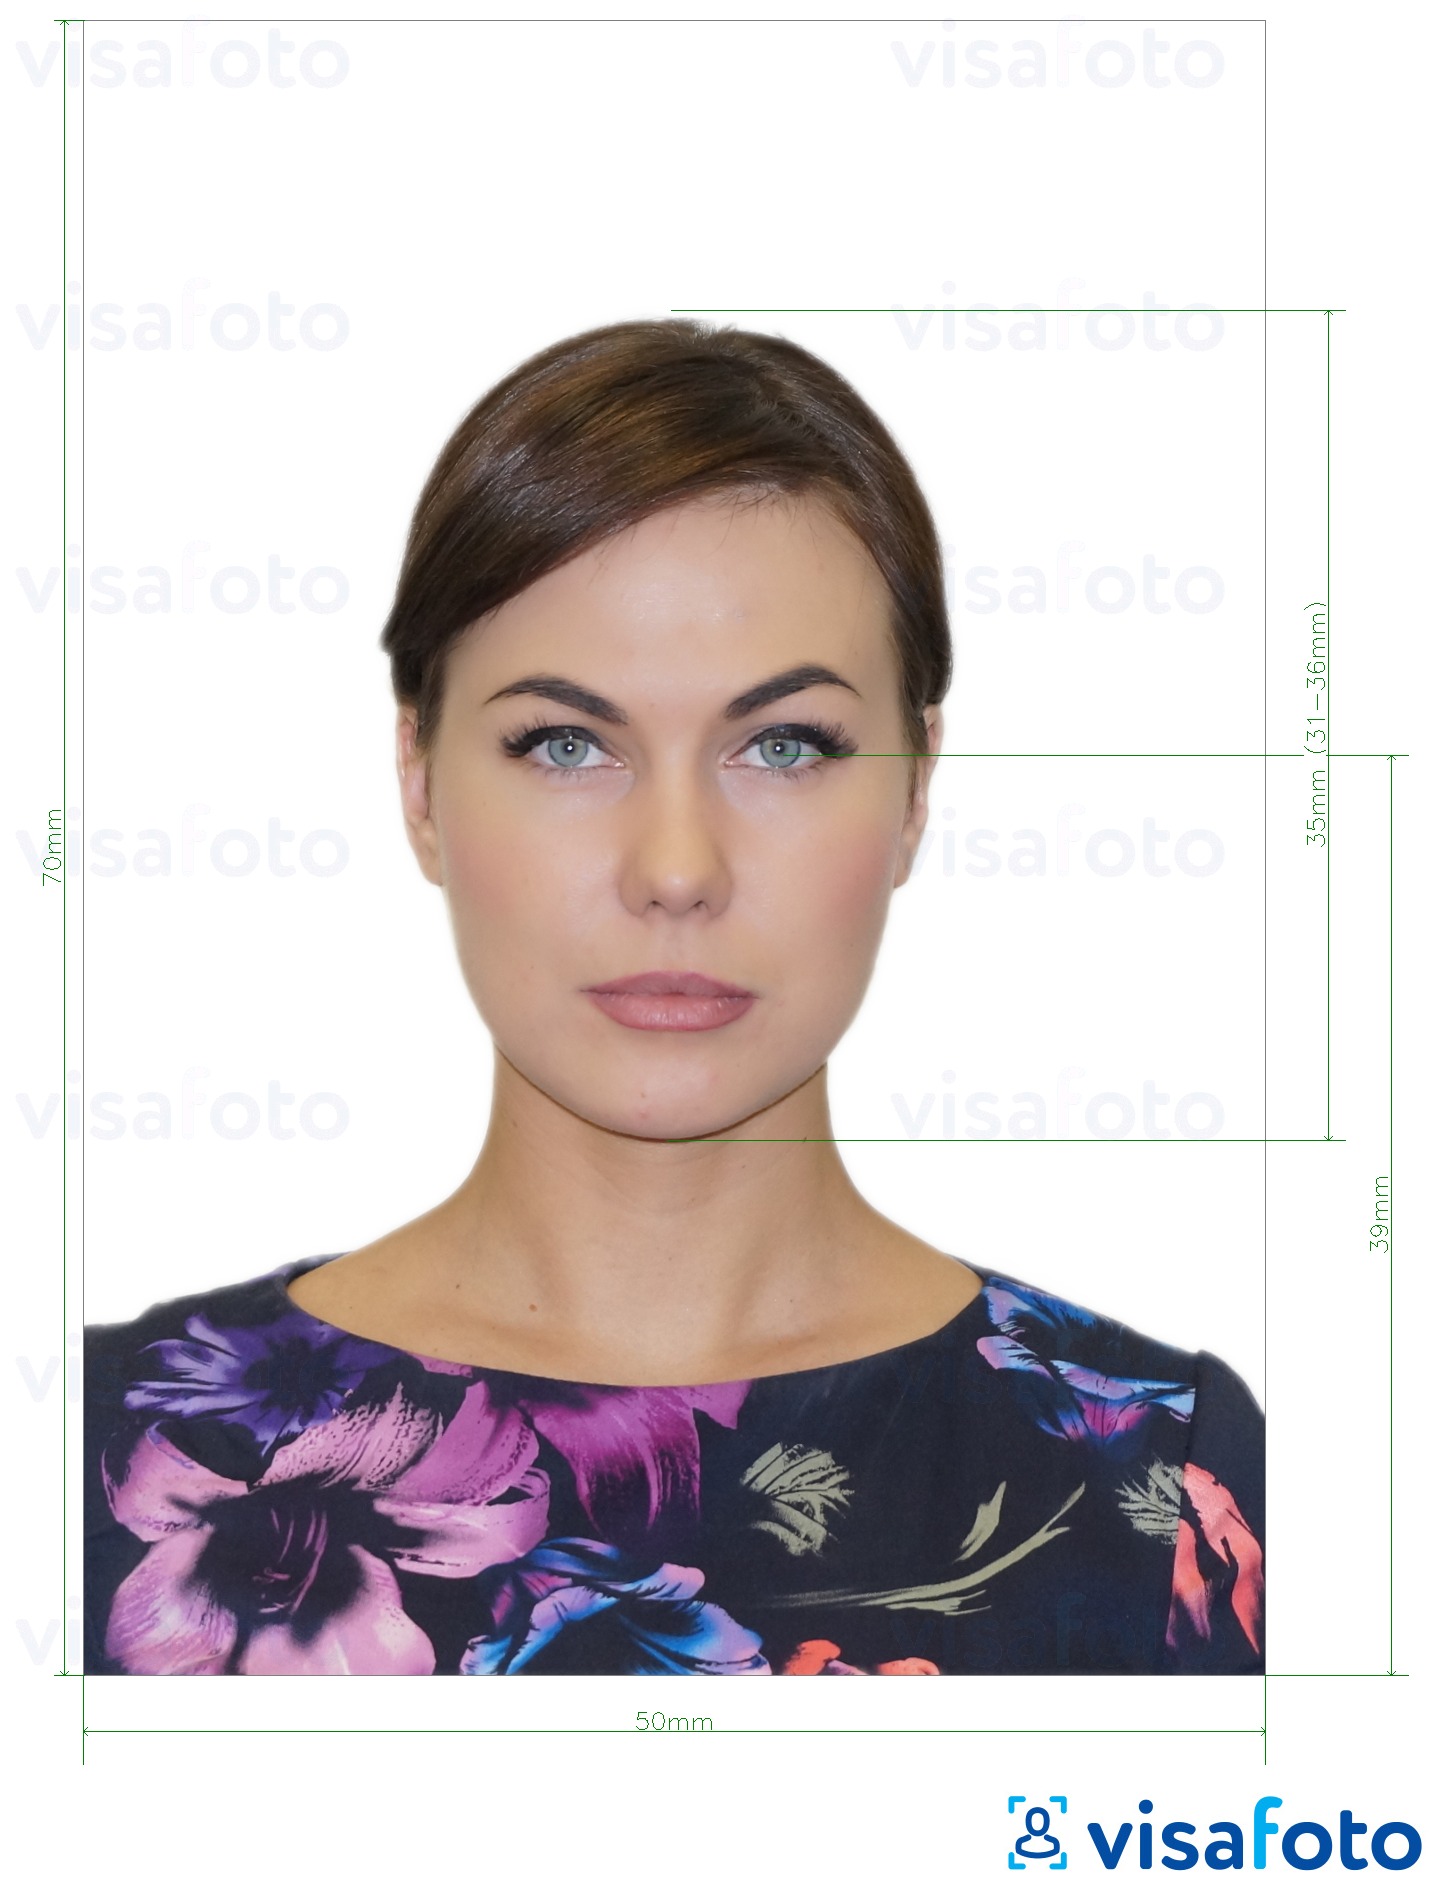 Example of photo for Canada security licence 5x7 cm with exact size specification